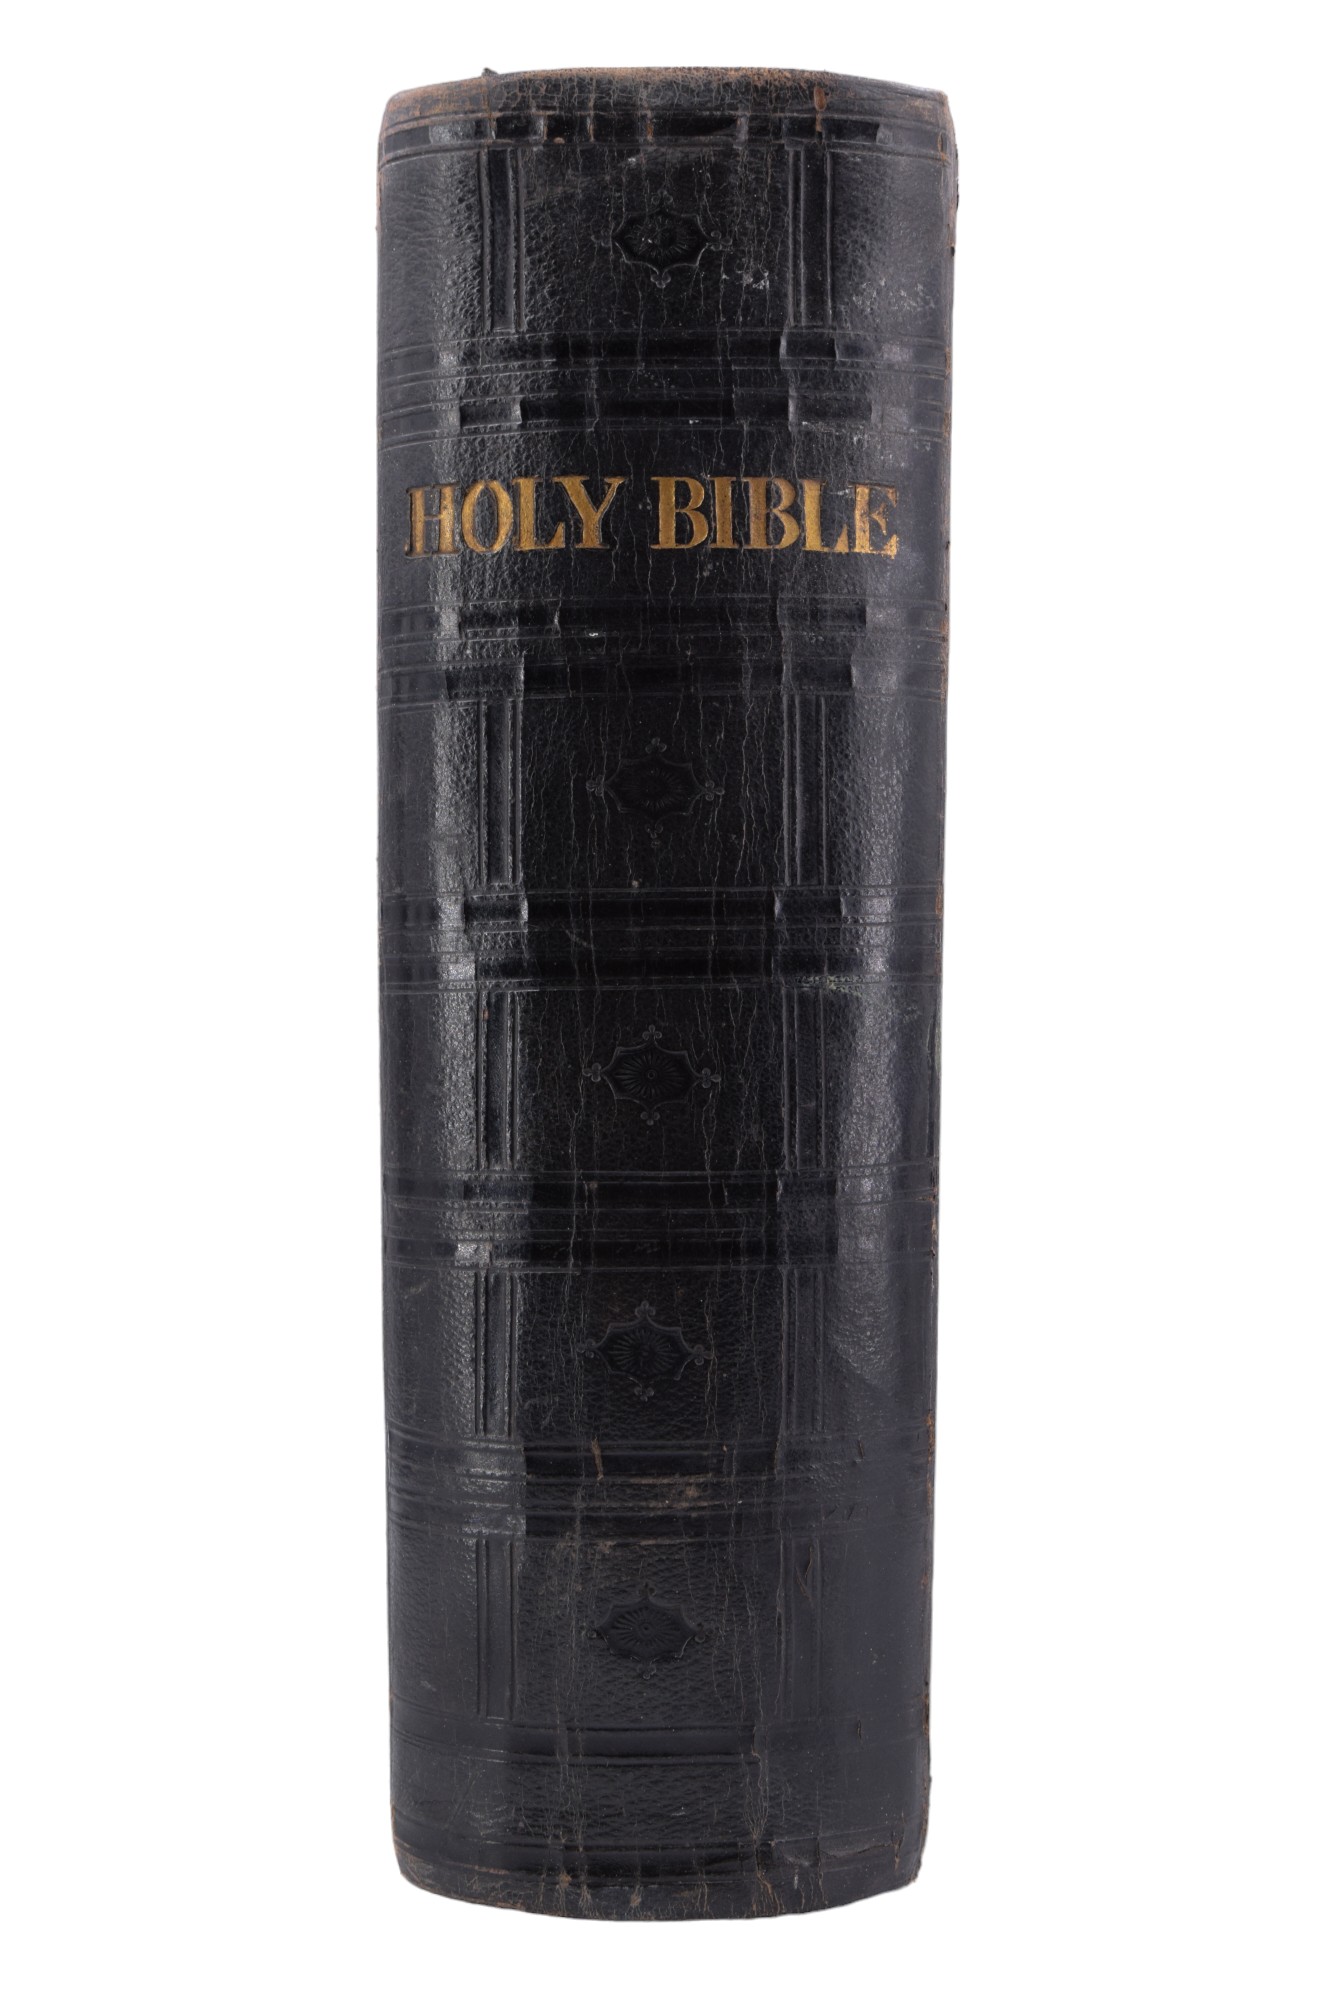 A Victorian Family Bible by Cassell, Petter and Galpin, full calf with gilt tooled lettering - Image 7 of 9